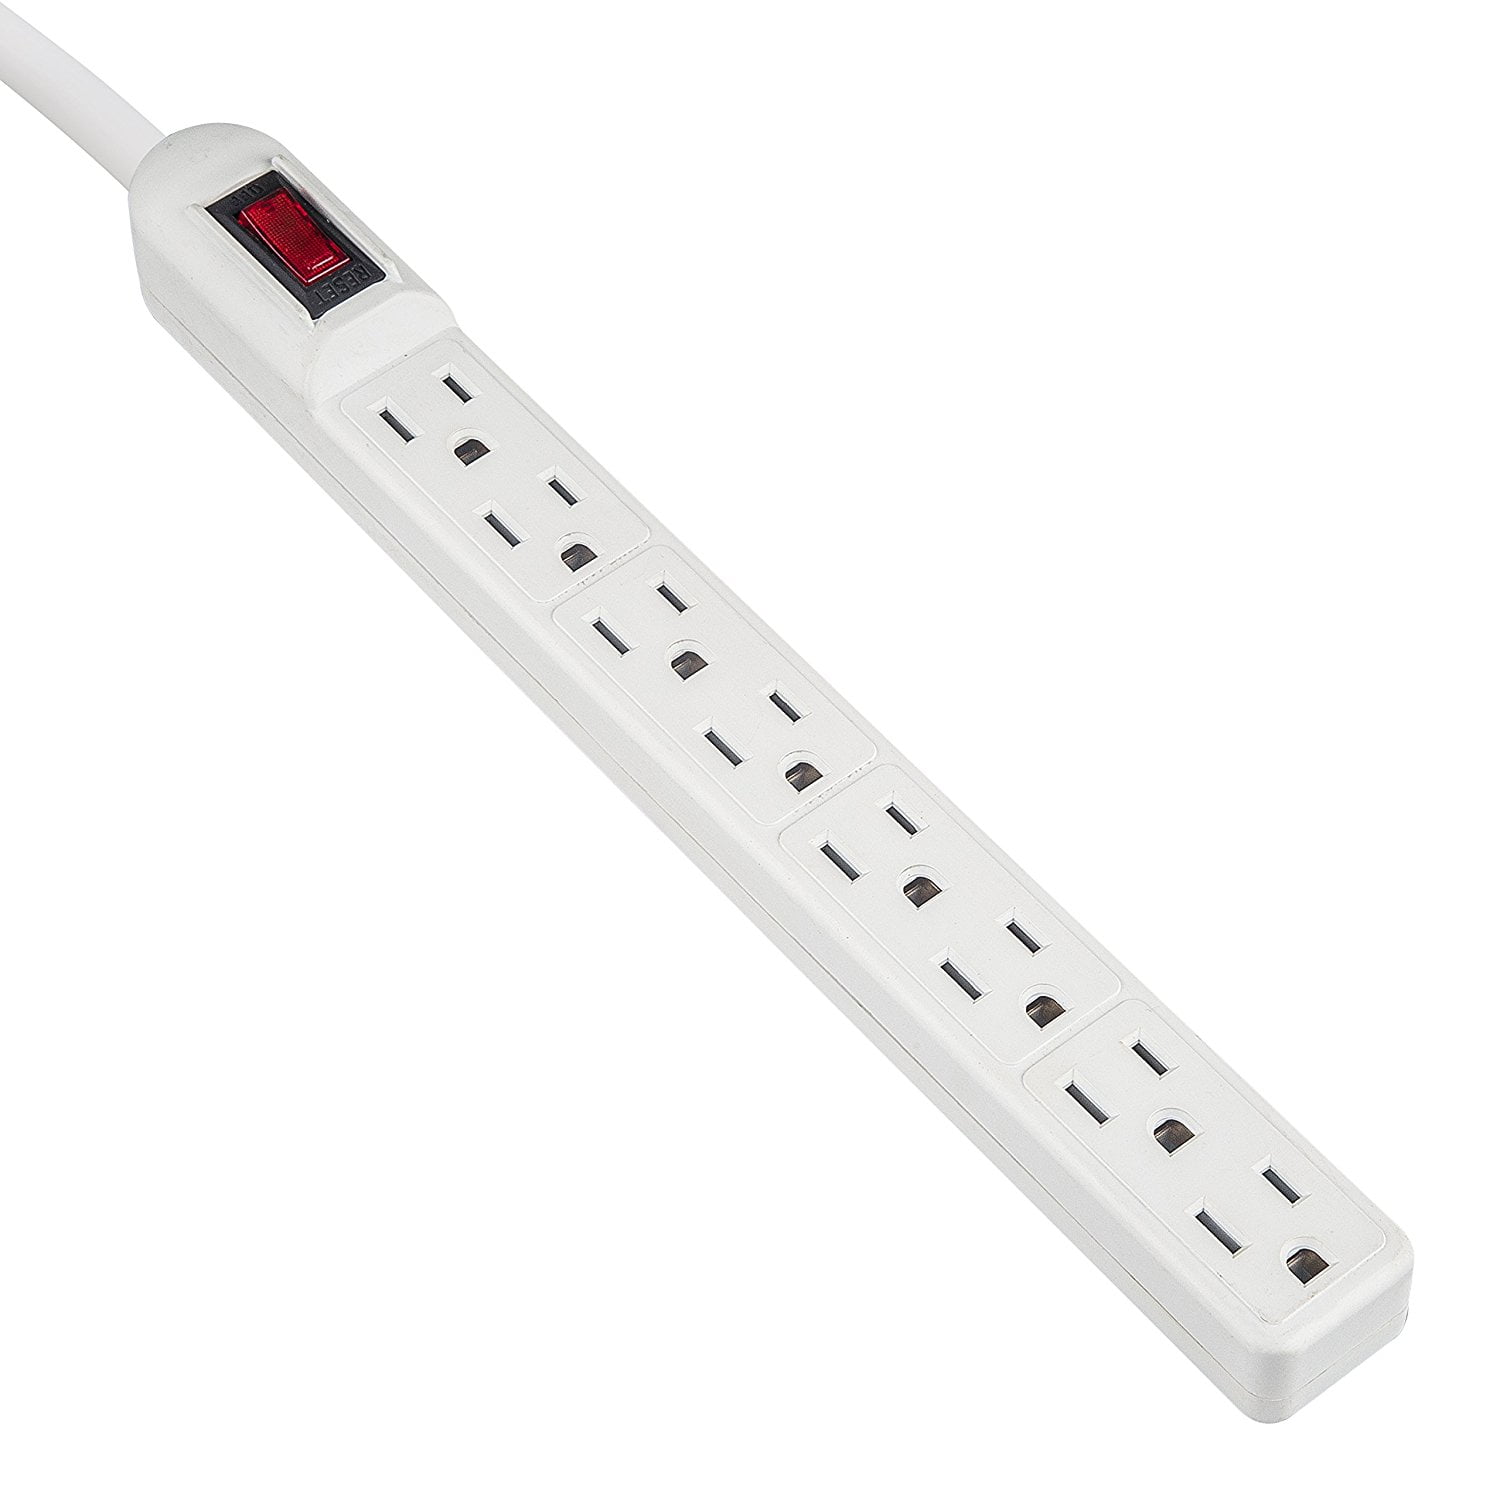 FREE SHIPPING! UL Listed ✅ 8 Outlet Power Strip Surge Protector 15A 125V 90J 